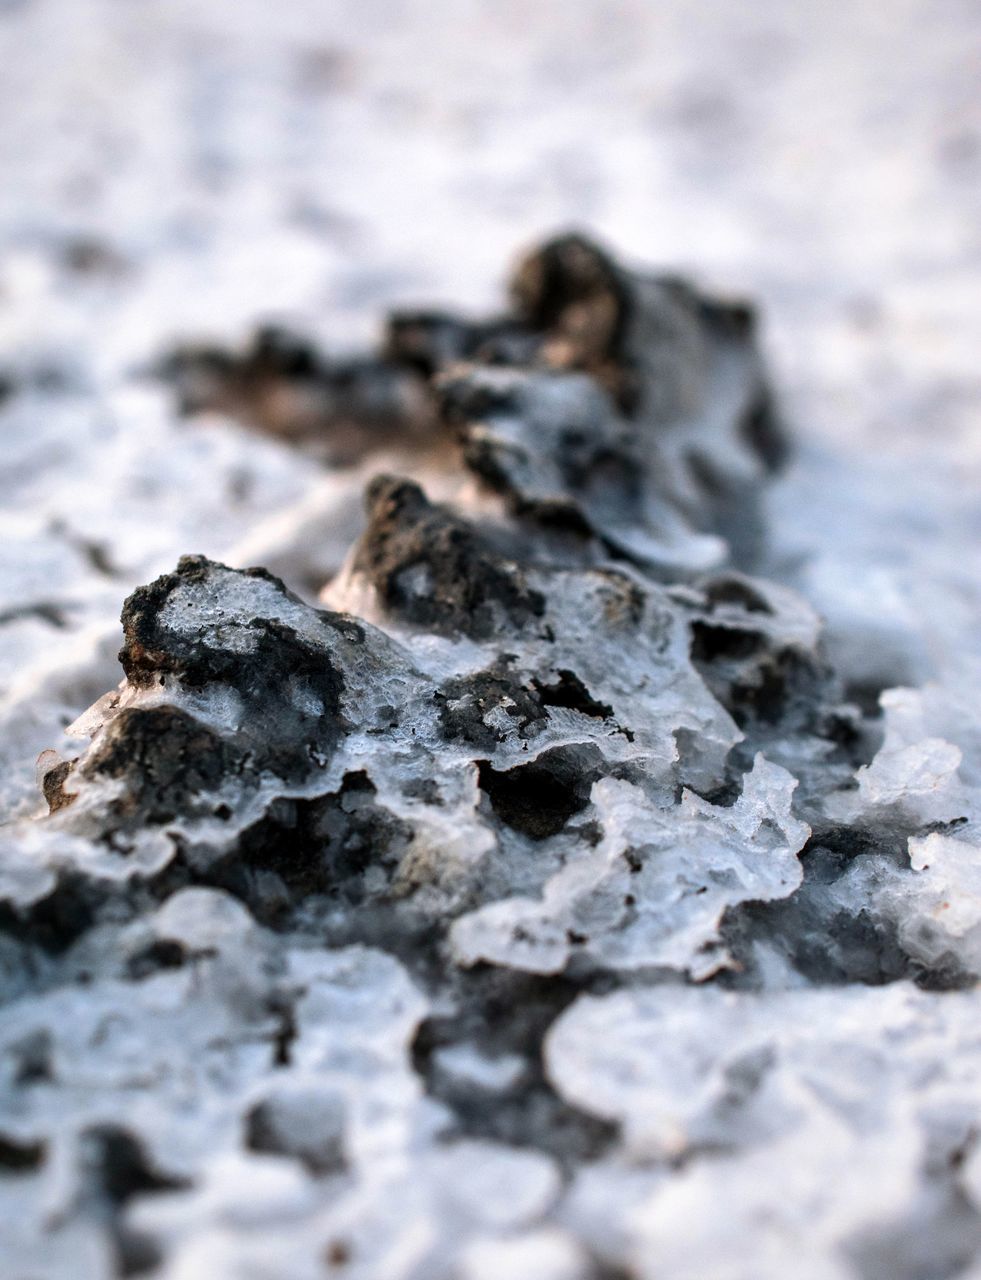 CLOSE-UP OF ICE ON ROCK